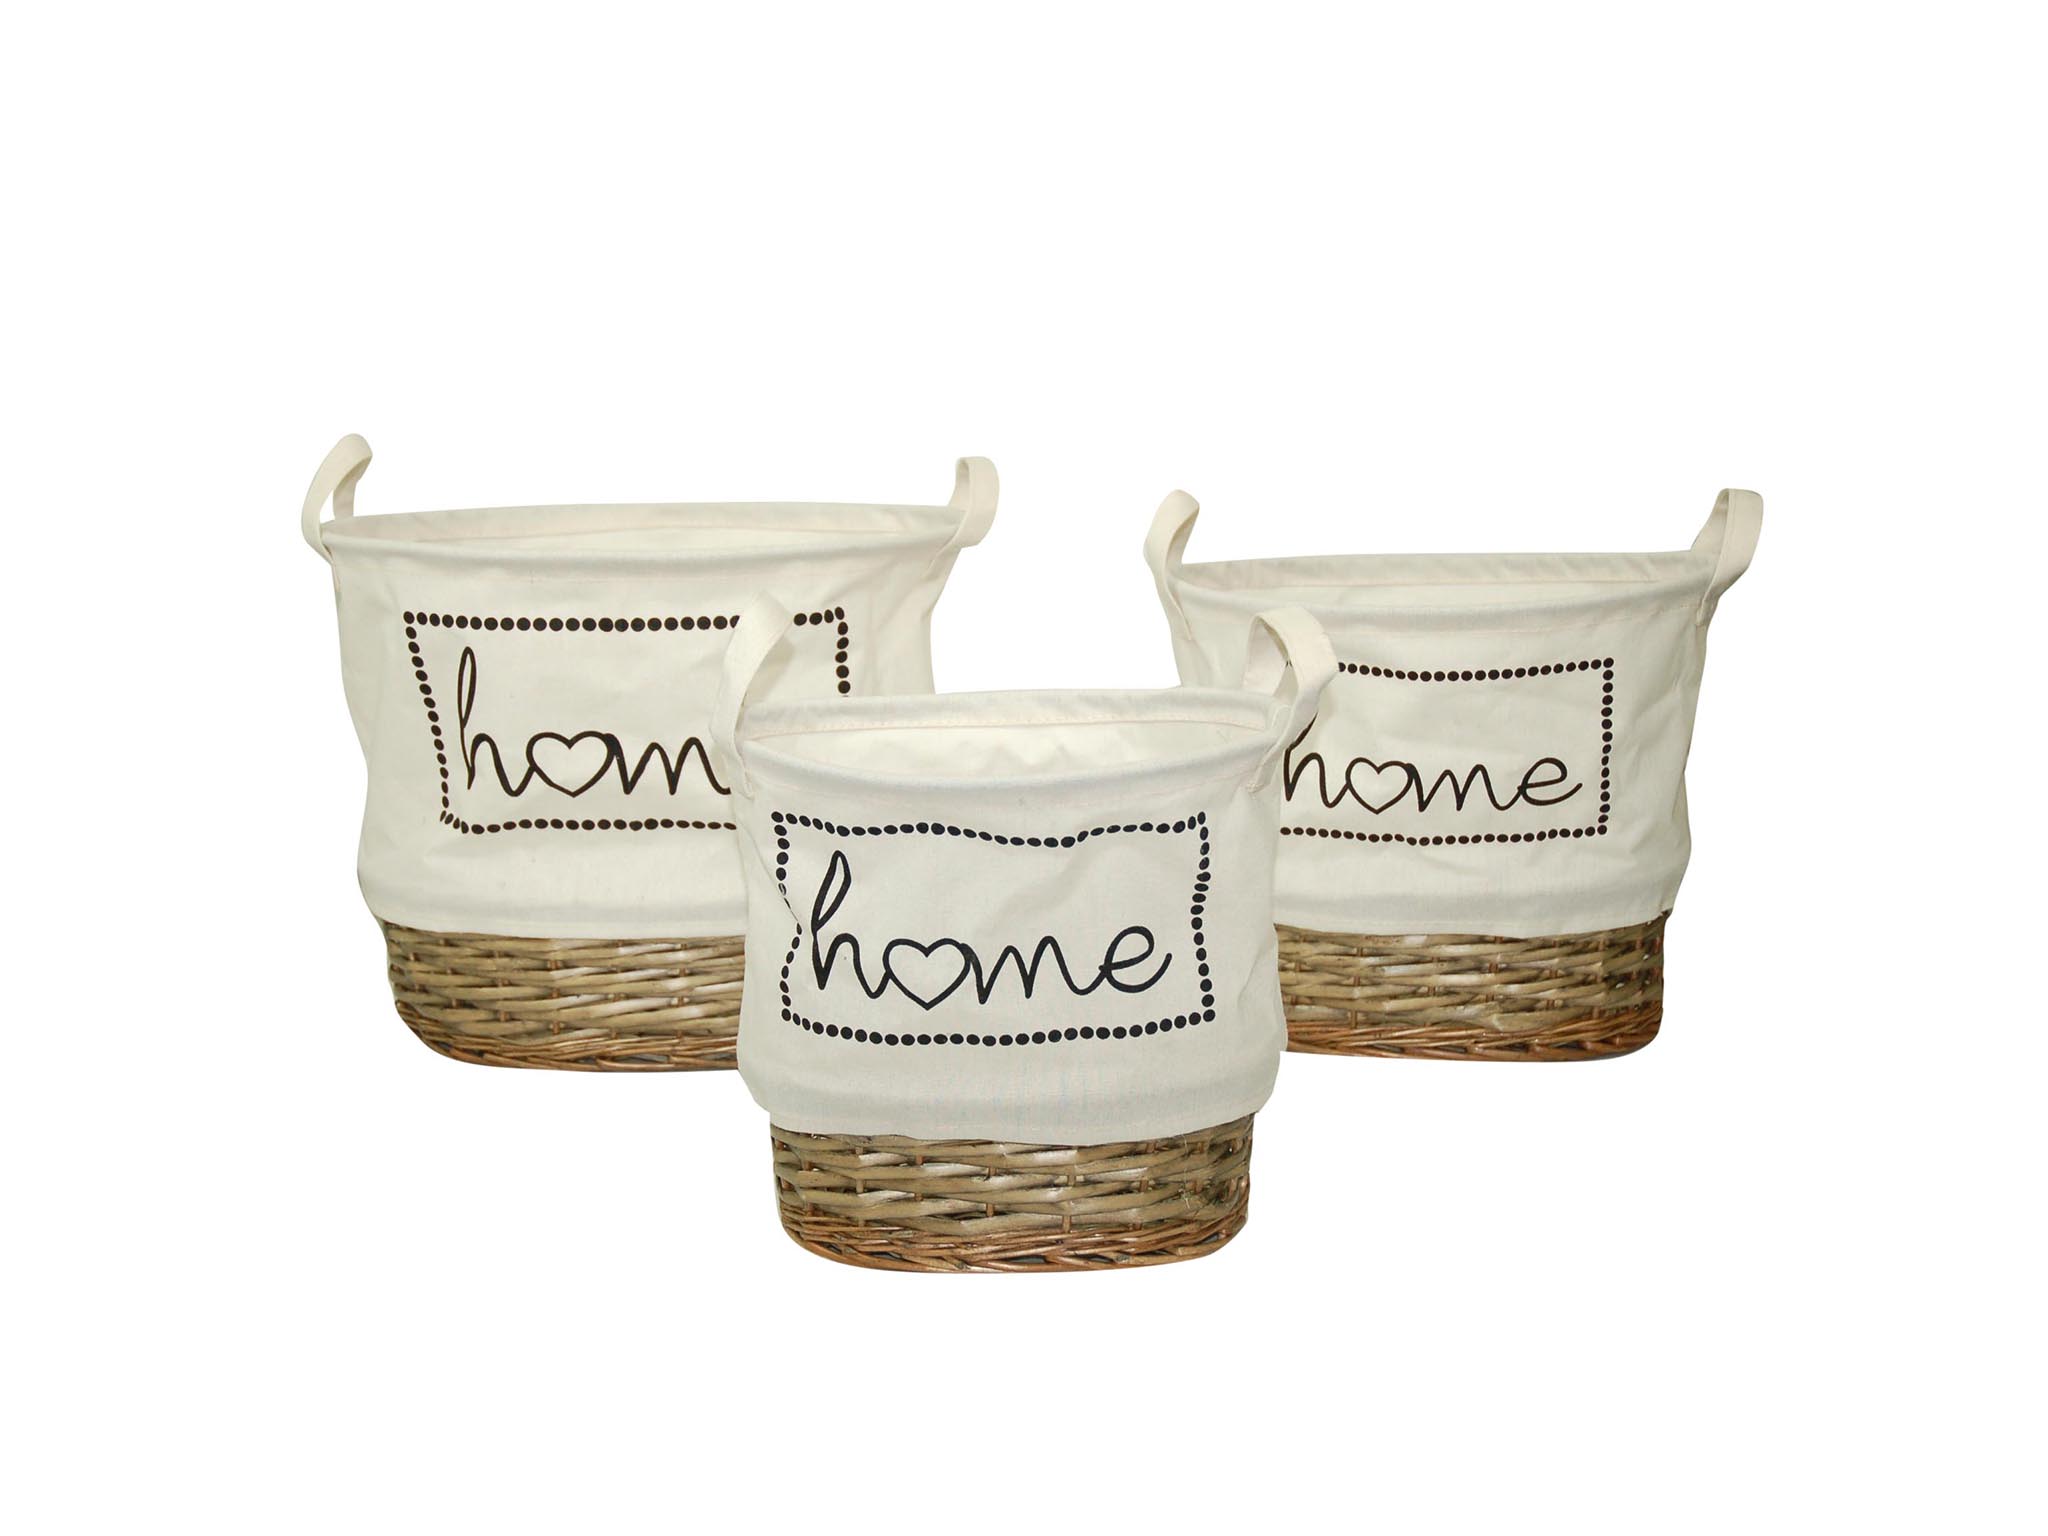 SET 3 OVAL WHITE HAMPERS HOME cod. 3900132